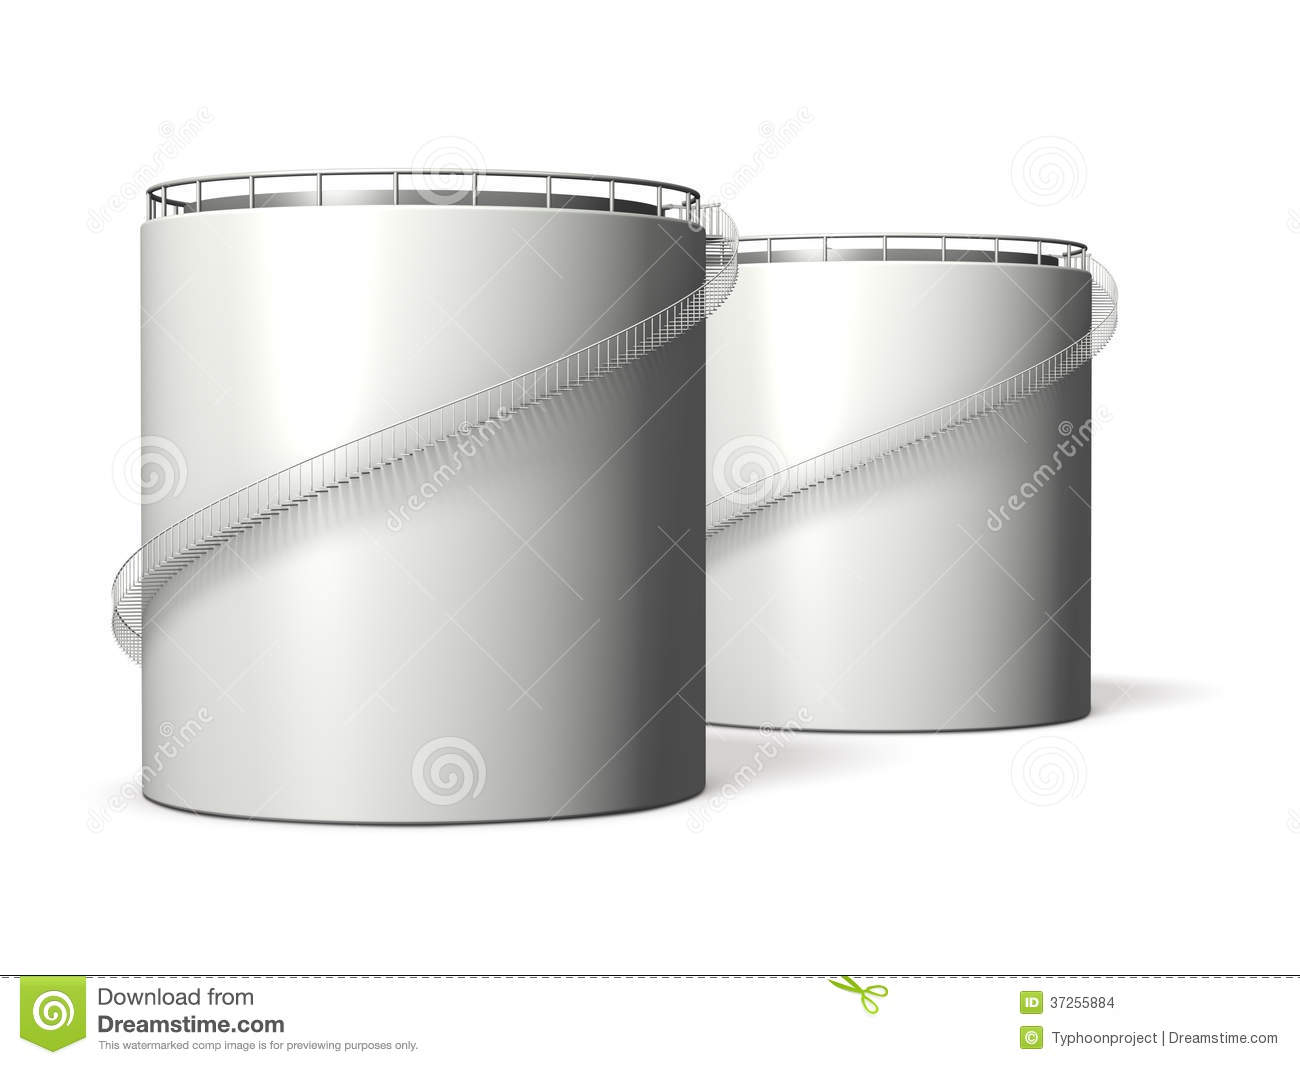 Miniature Model Of Oil Tank Stock Images   Image  37255884